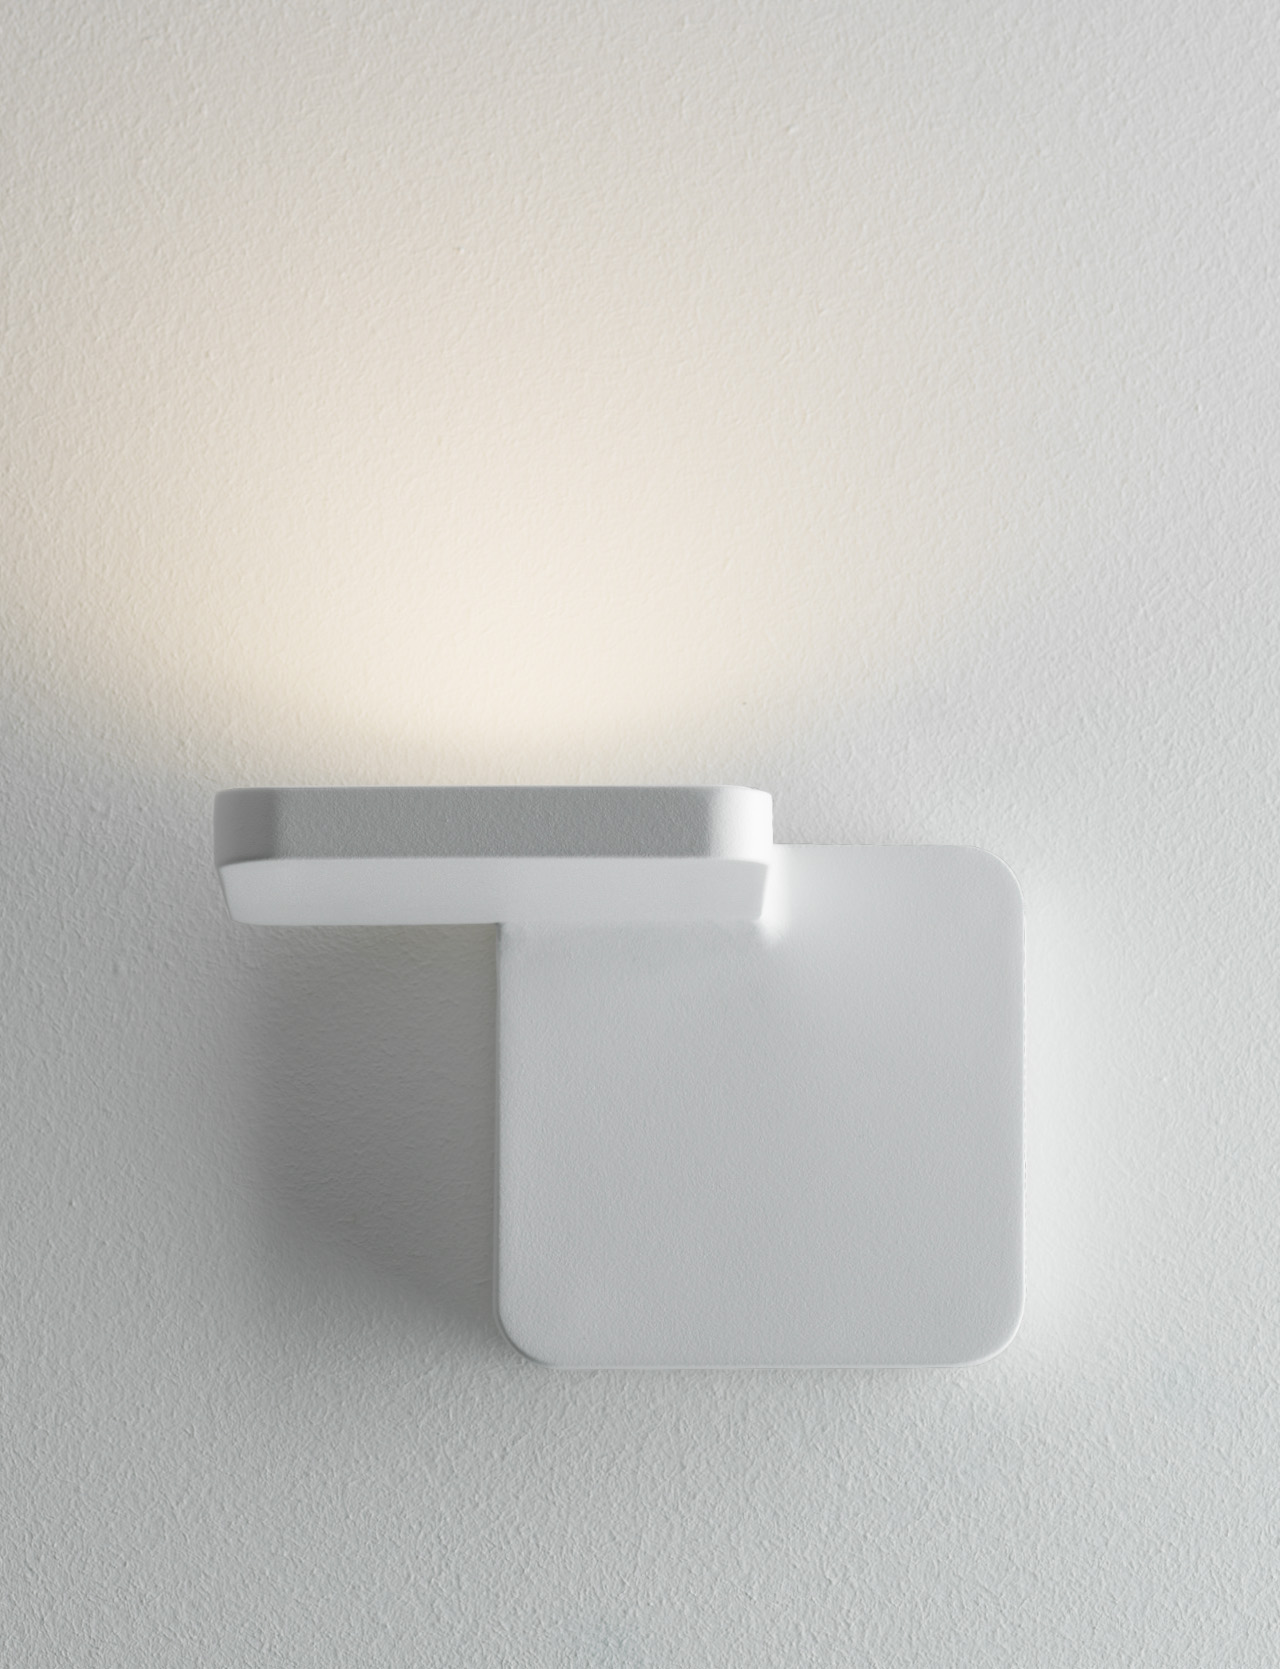 Quad-Lamp for Wall